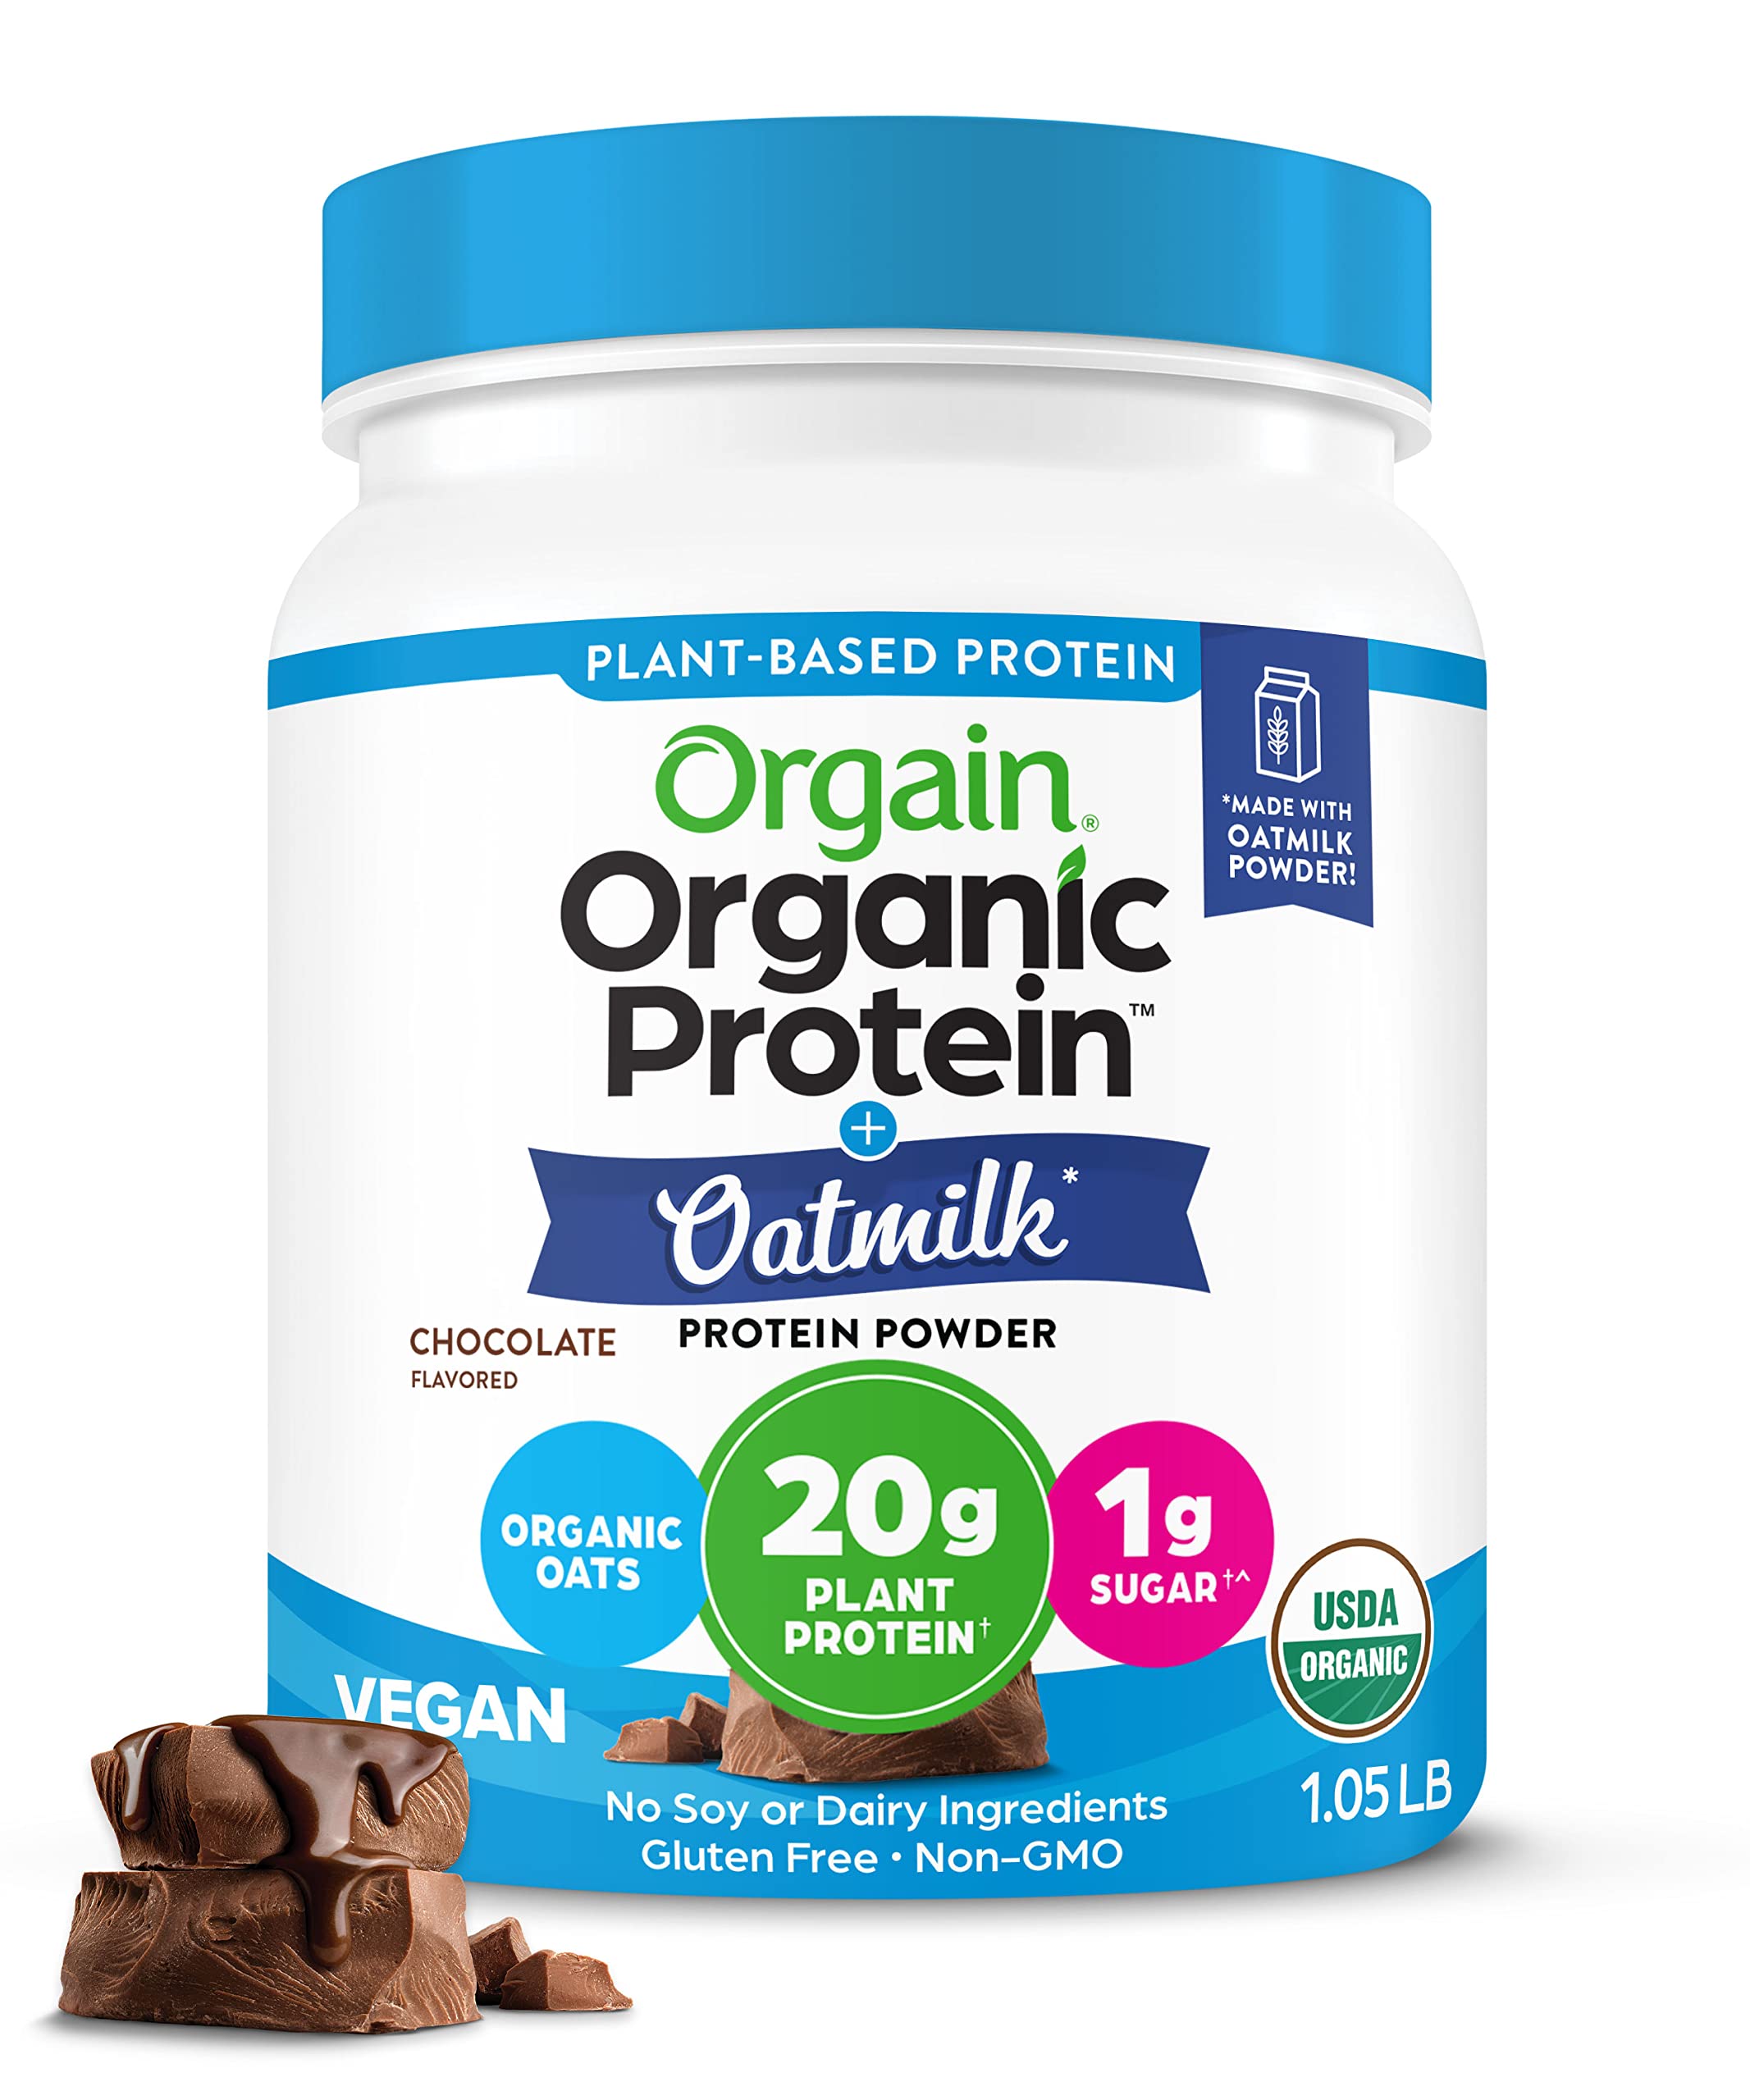 Orgain Organic Vegan Protein Powder + Oat Milk, Chocolate - 20g Plant Based Protein with Milk from Oats, Gluten Free, Dairy Free, Lactose Free, Soy Free, Low Sugar, Non GMO, Kosher - 1.05lb